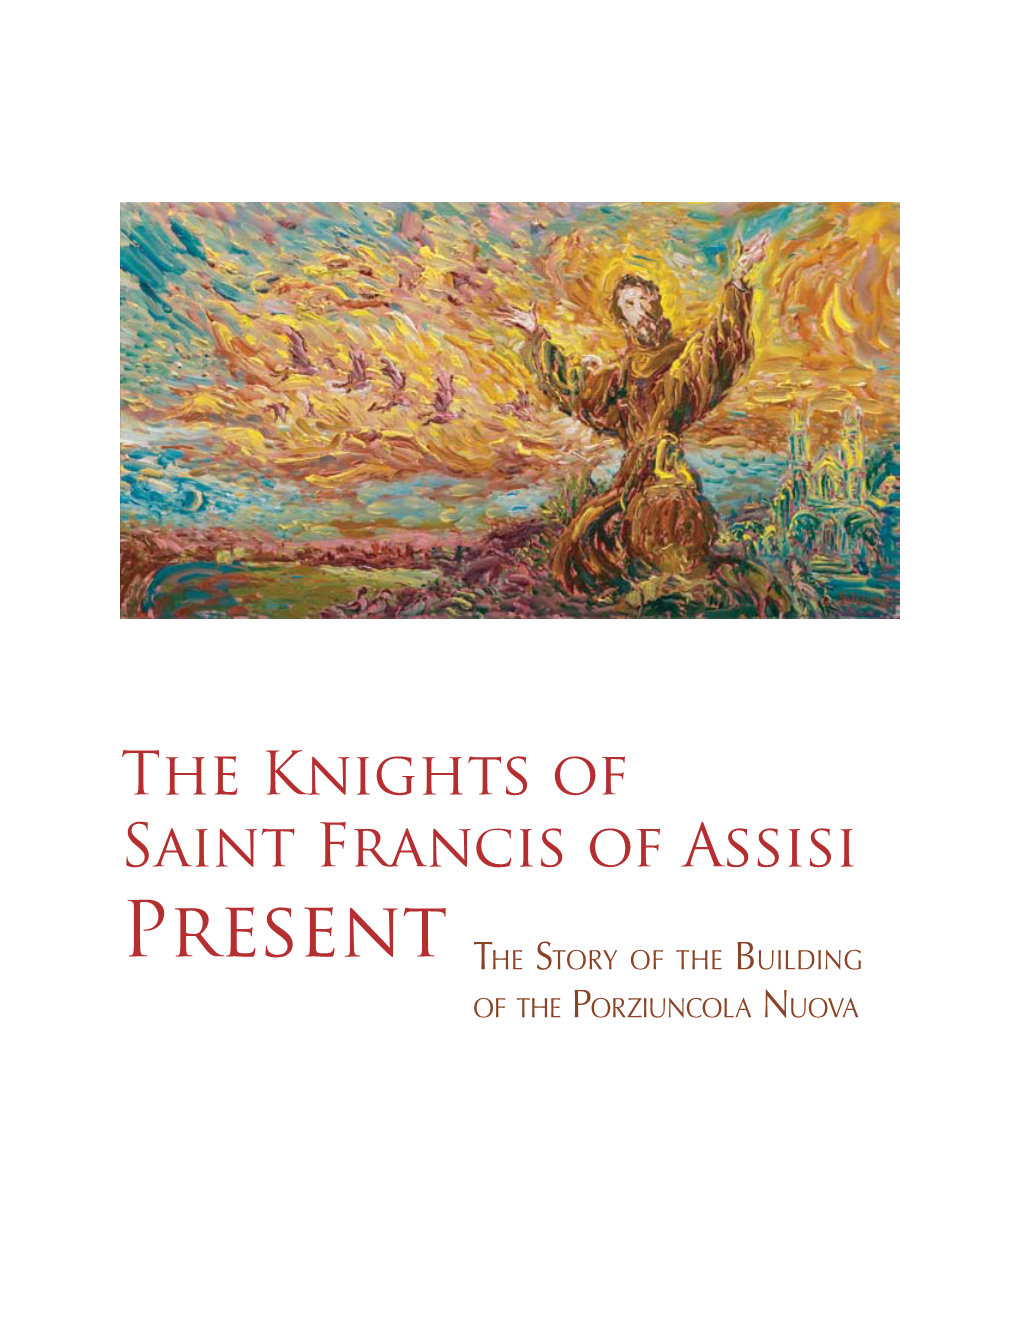 The Knights of Saint Francis of Assisi